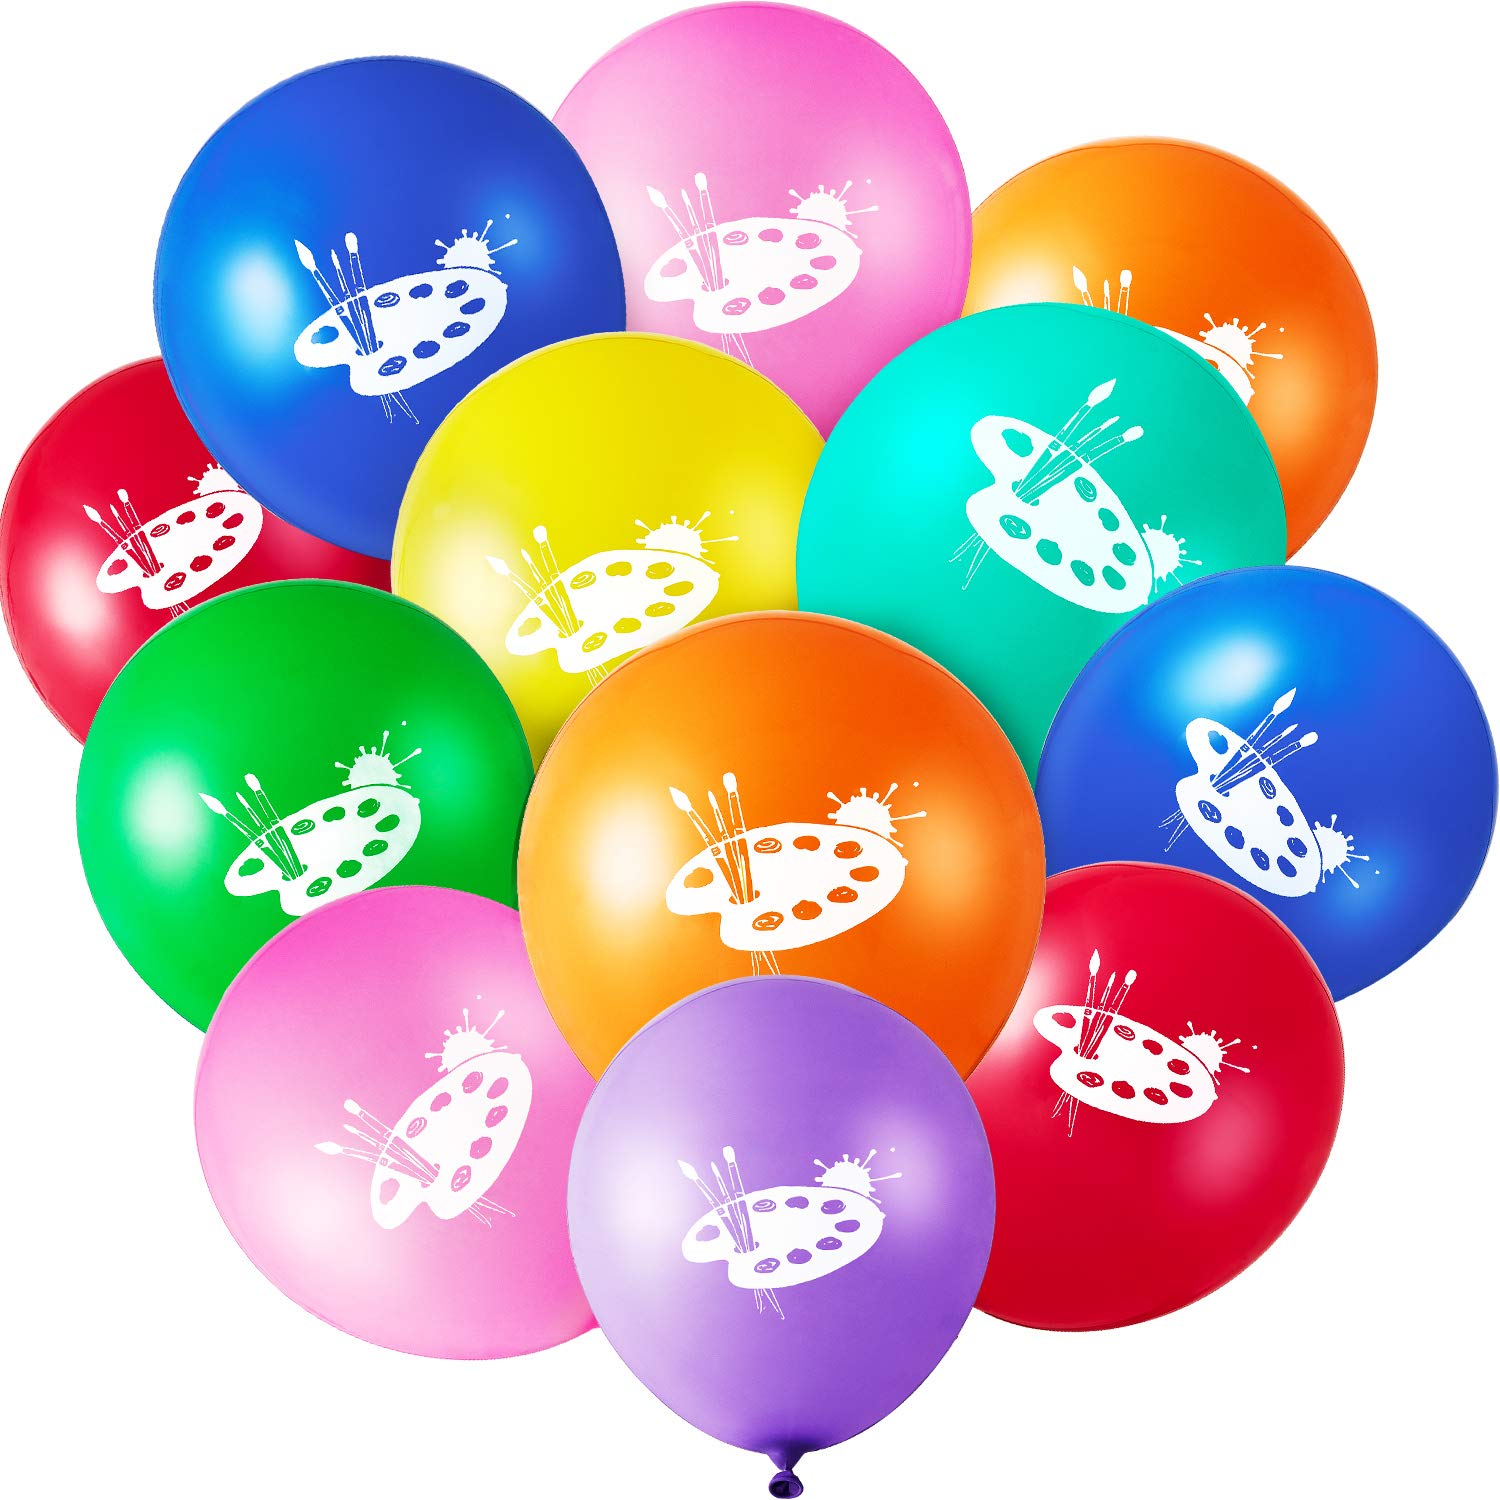 48 Pieces Art Party Balloons Printed Party Latex Balloons Assorted Colors Balloons for Art Classroom Paint Class Painting Paintbrush Birthday Party Decoration, 12 Inches